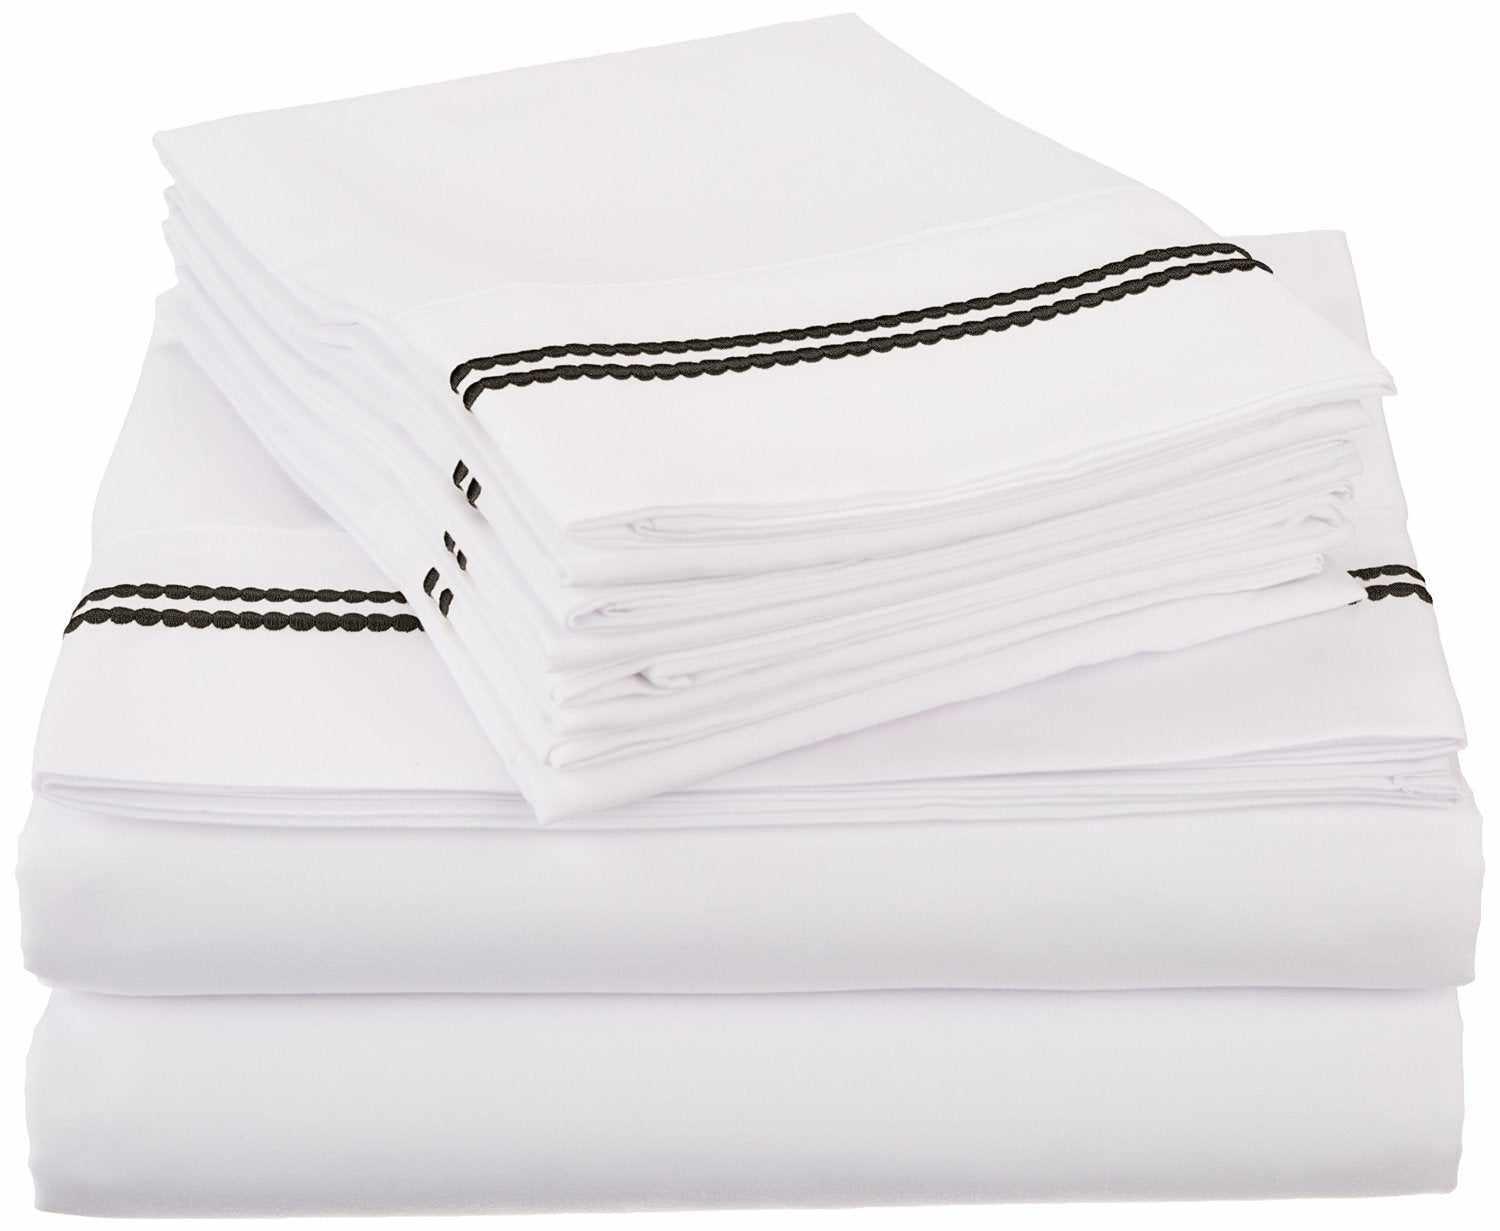 Superior Solid 2-Line Embroidered Trim Wrinkle-Free Microfiber 6 Piece Sheet Set with Extra Pillowcases - White/Black